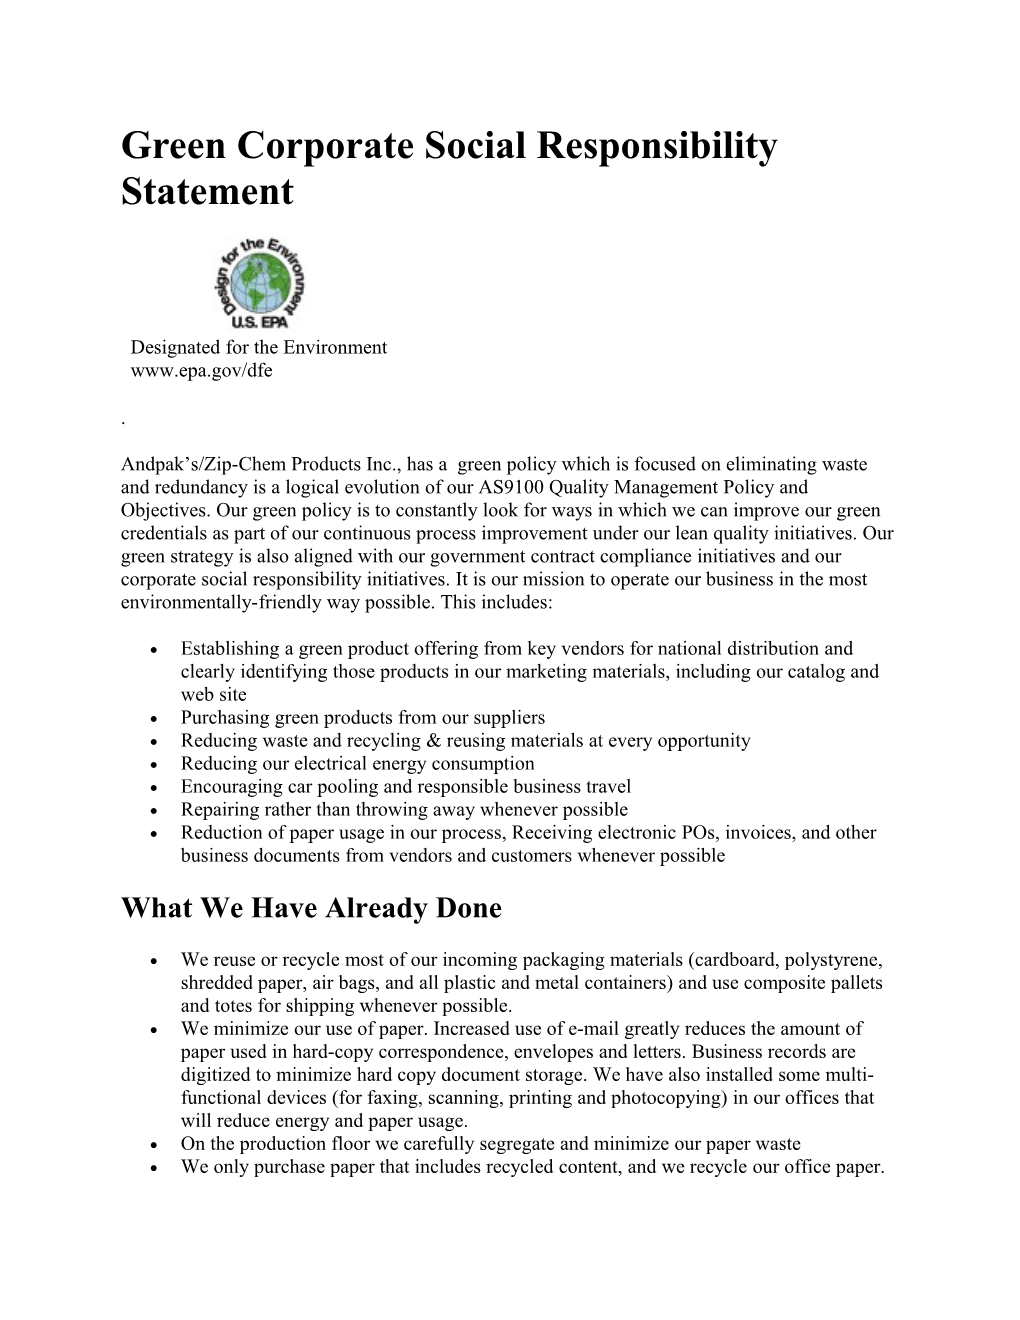 Green Corporate Social Responsibility Statement